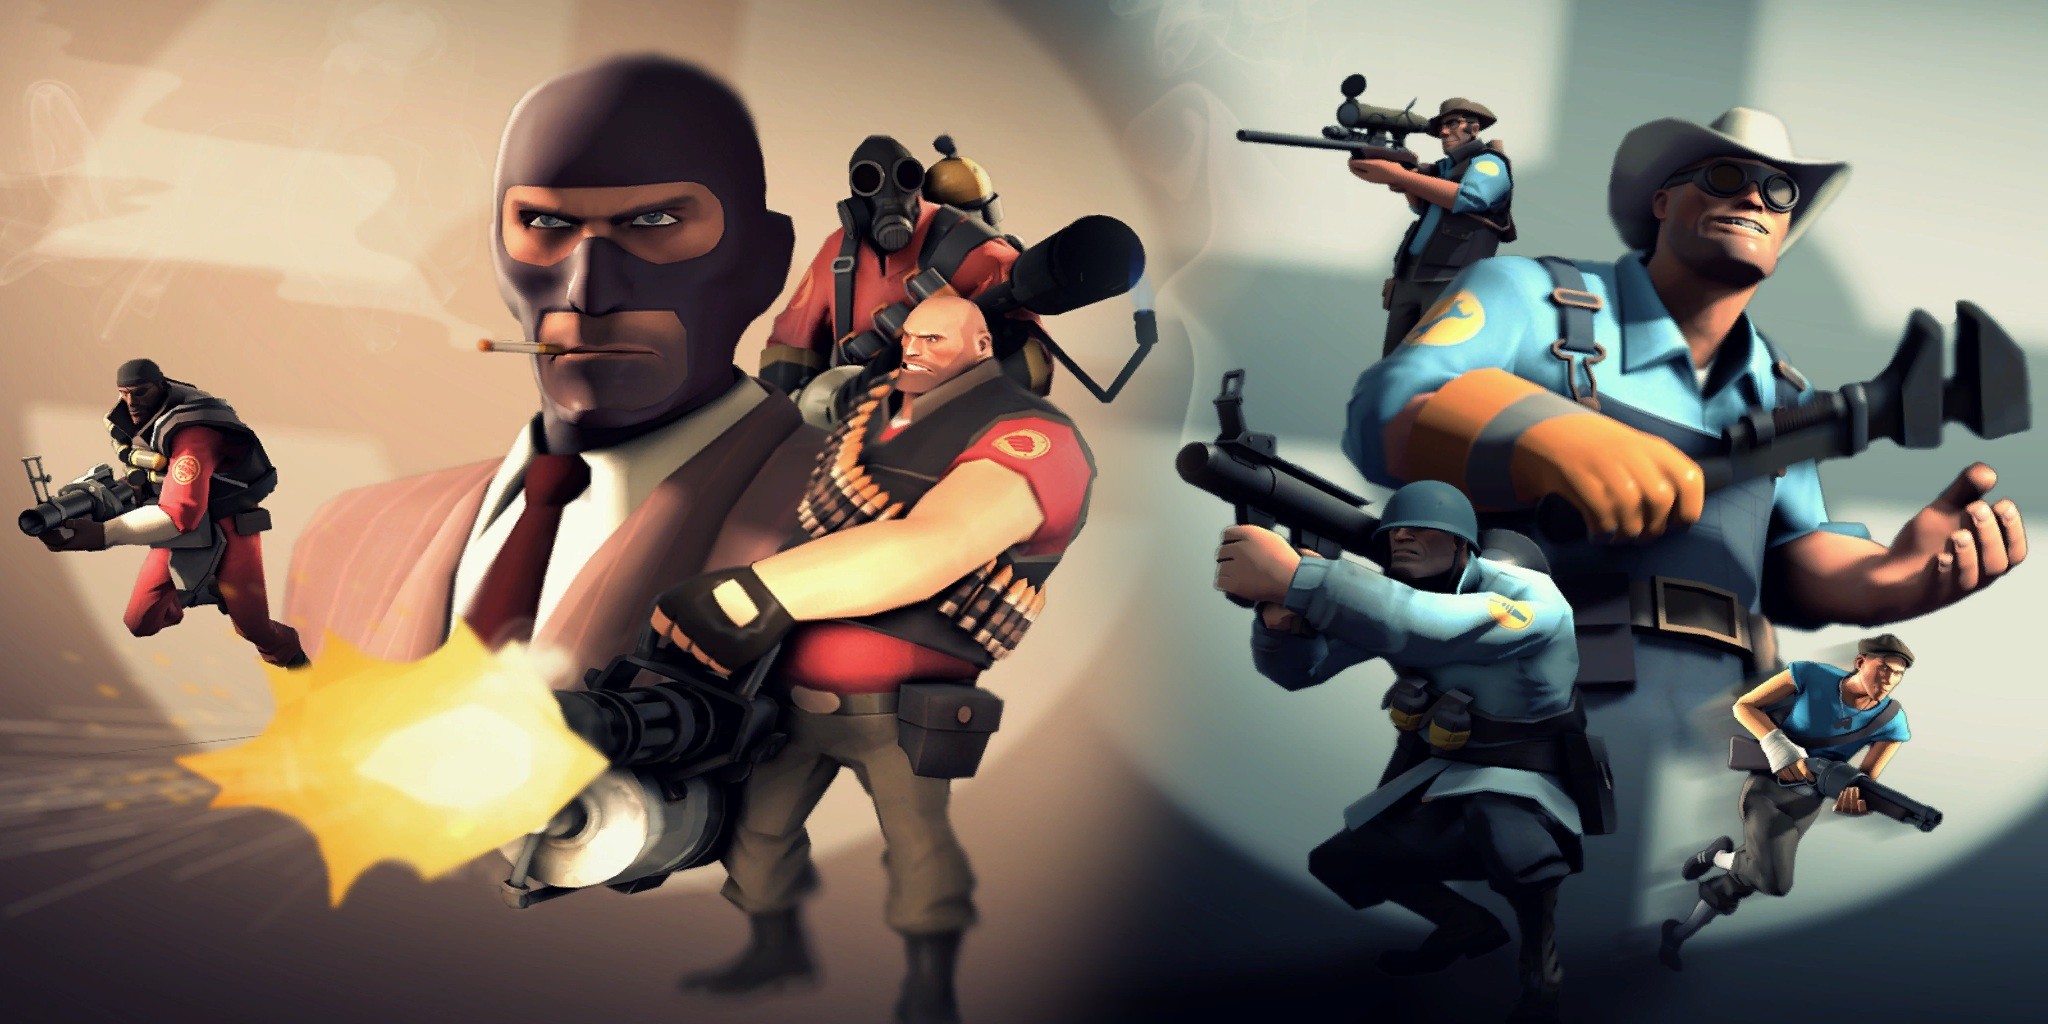 Team Fortress 2 Backgrounds